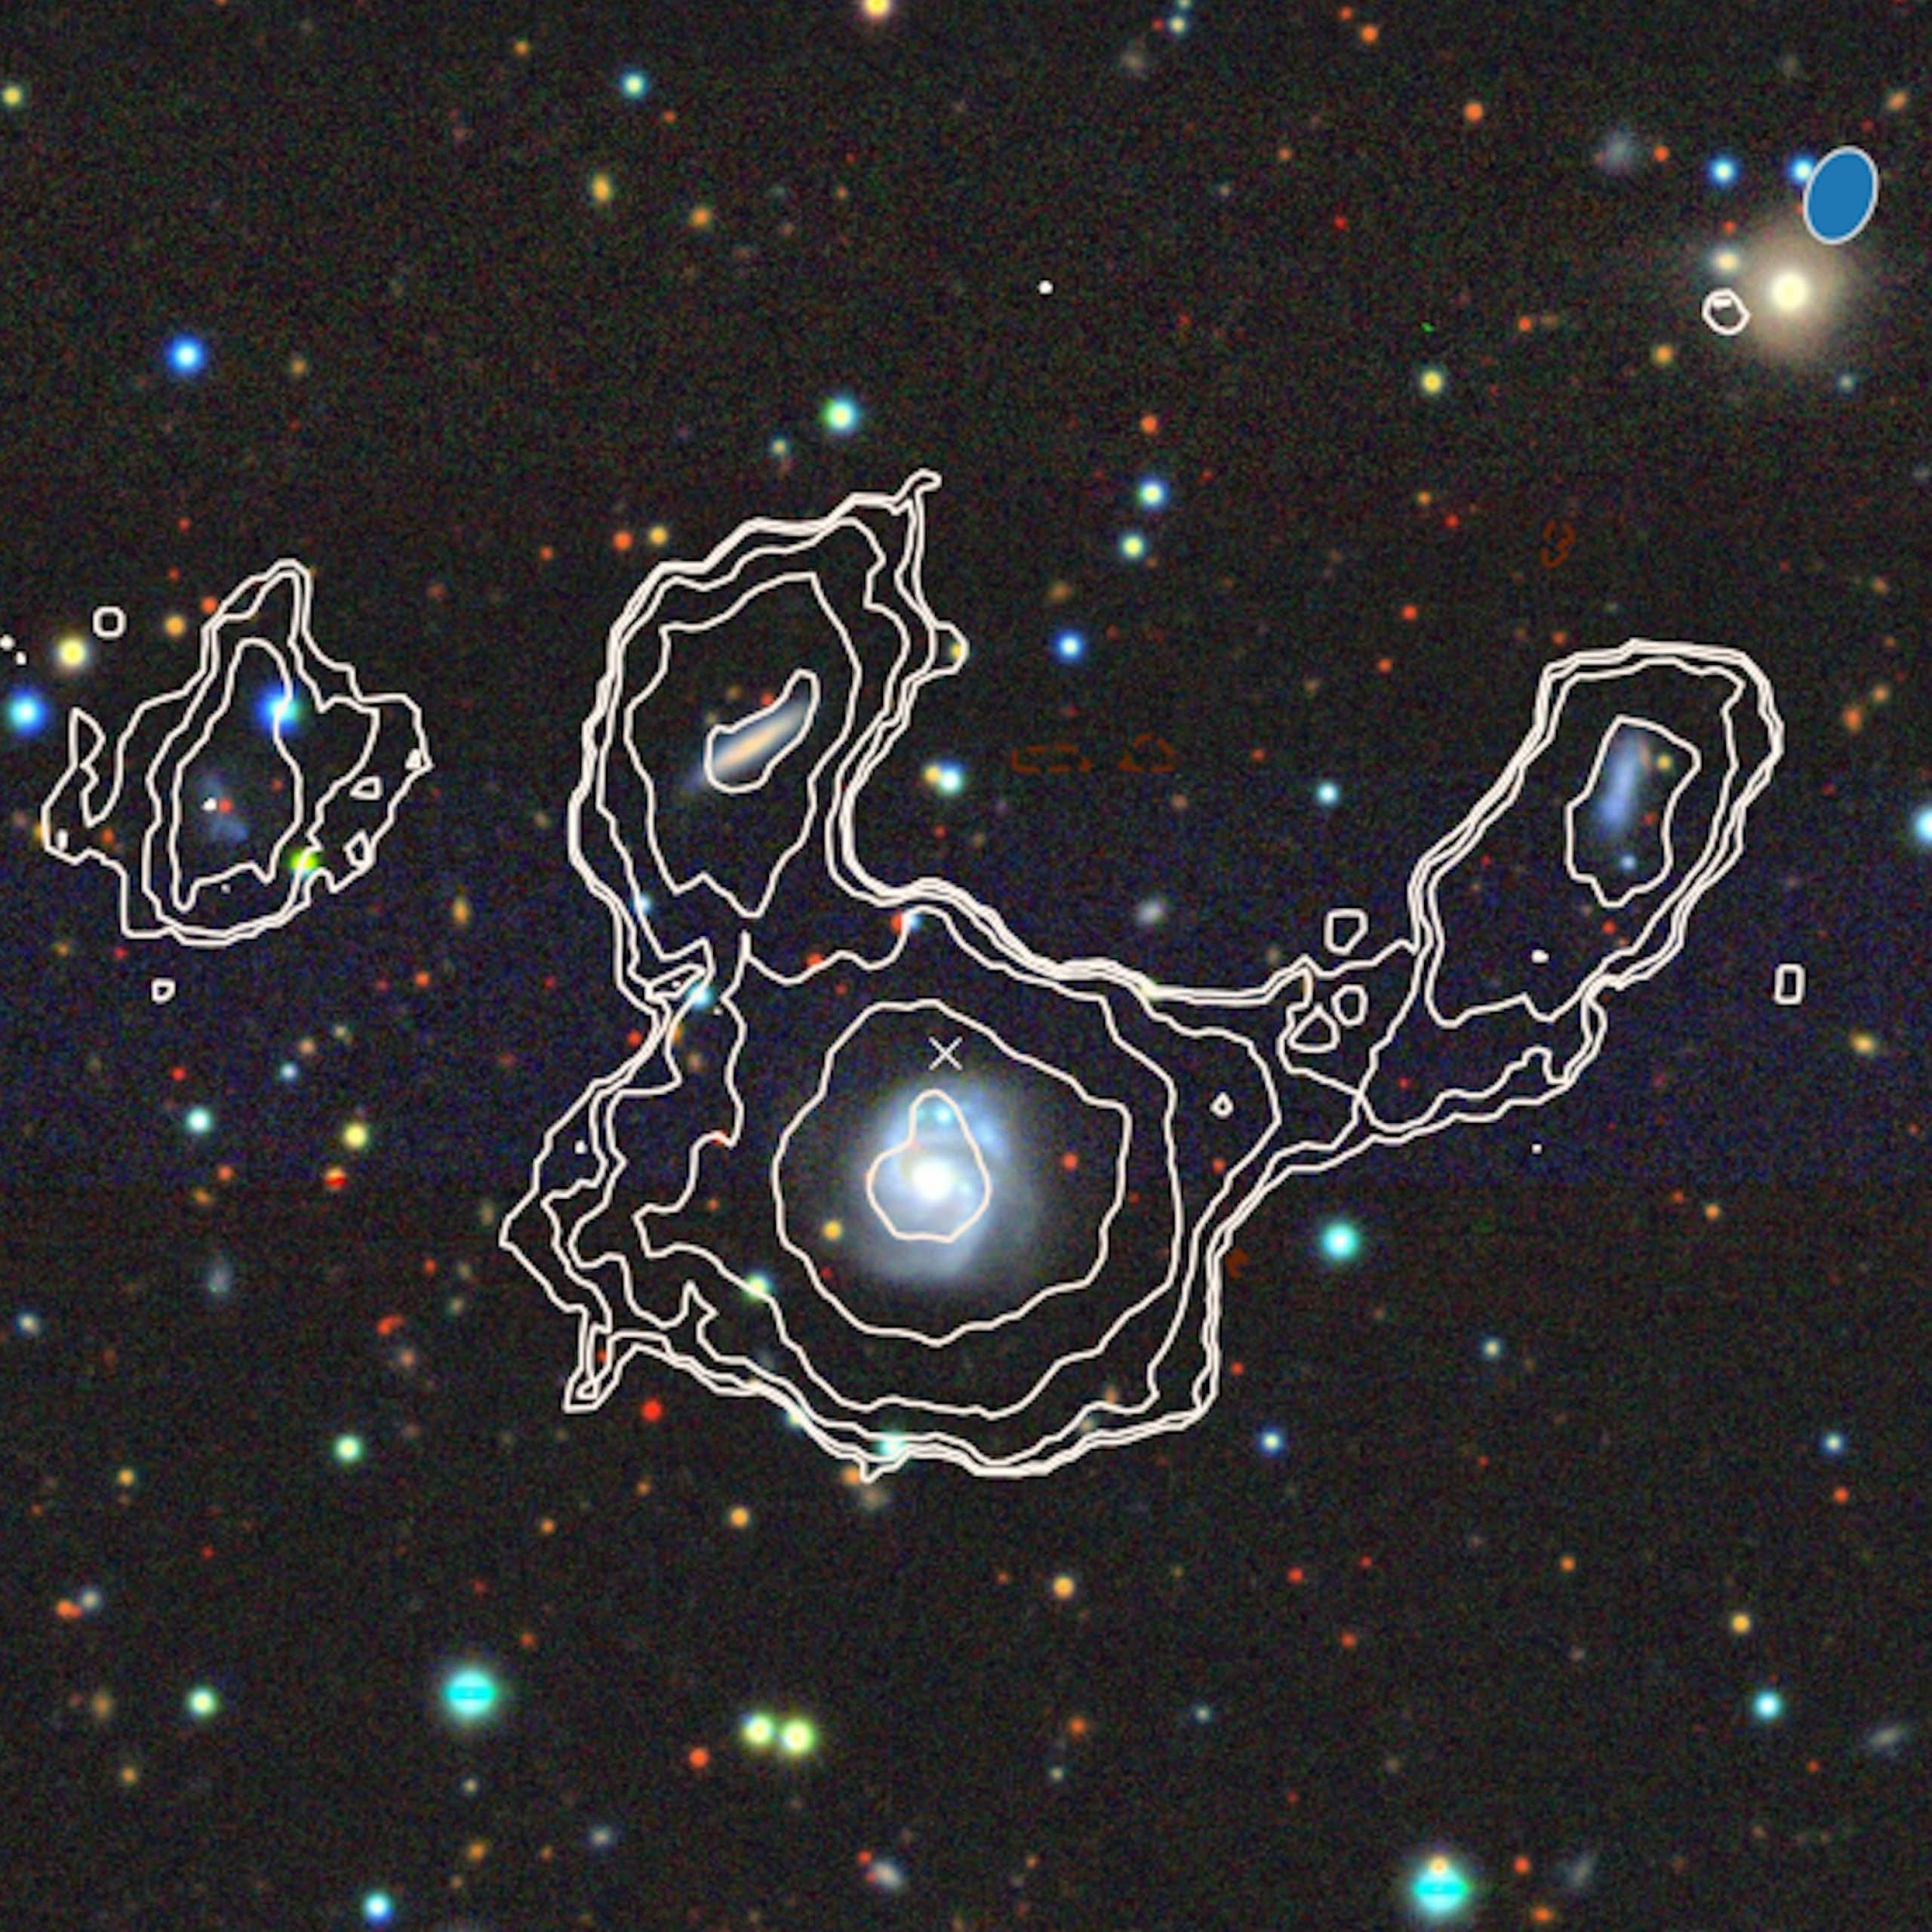 A photo of stars against a black background, with white contour lines drawn around some.